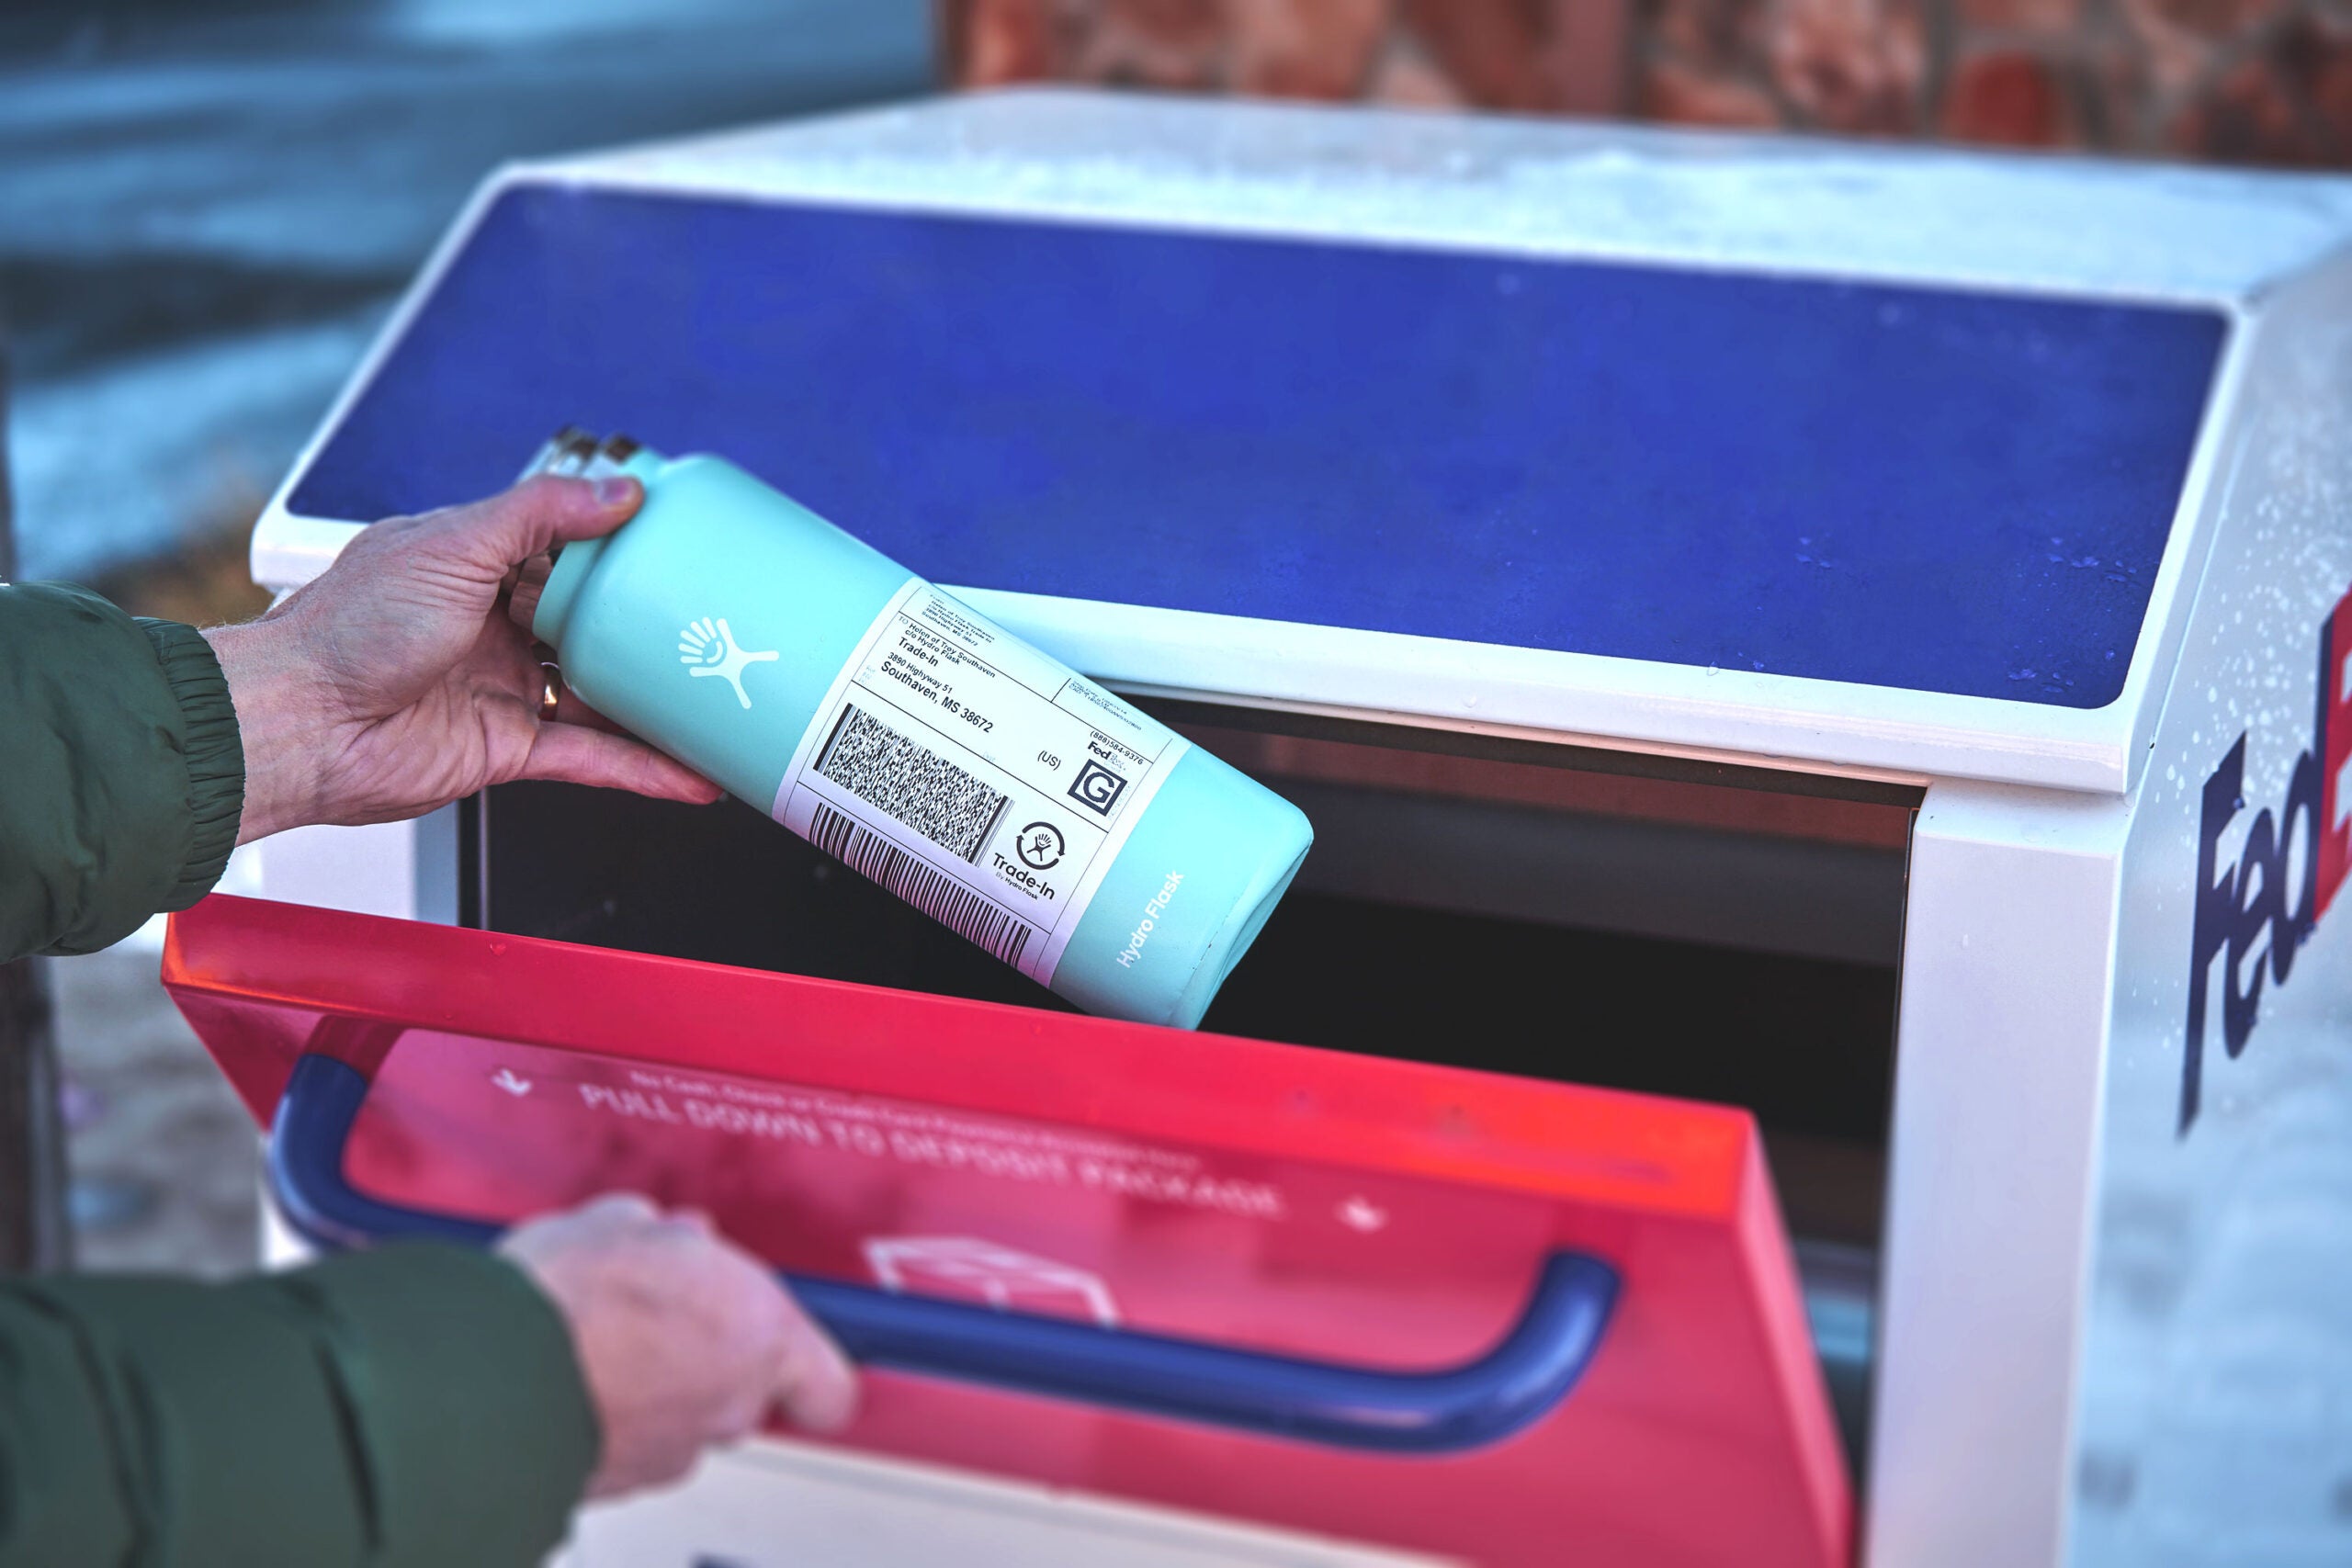 You Can Now Trade In Your Hydro Flask to Save Money—Here’s How